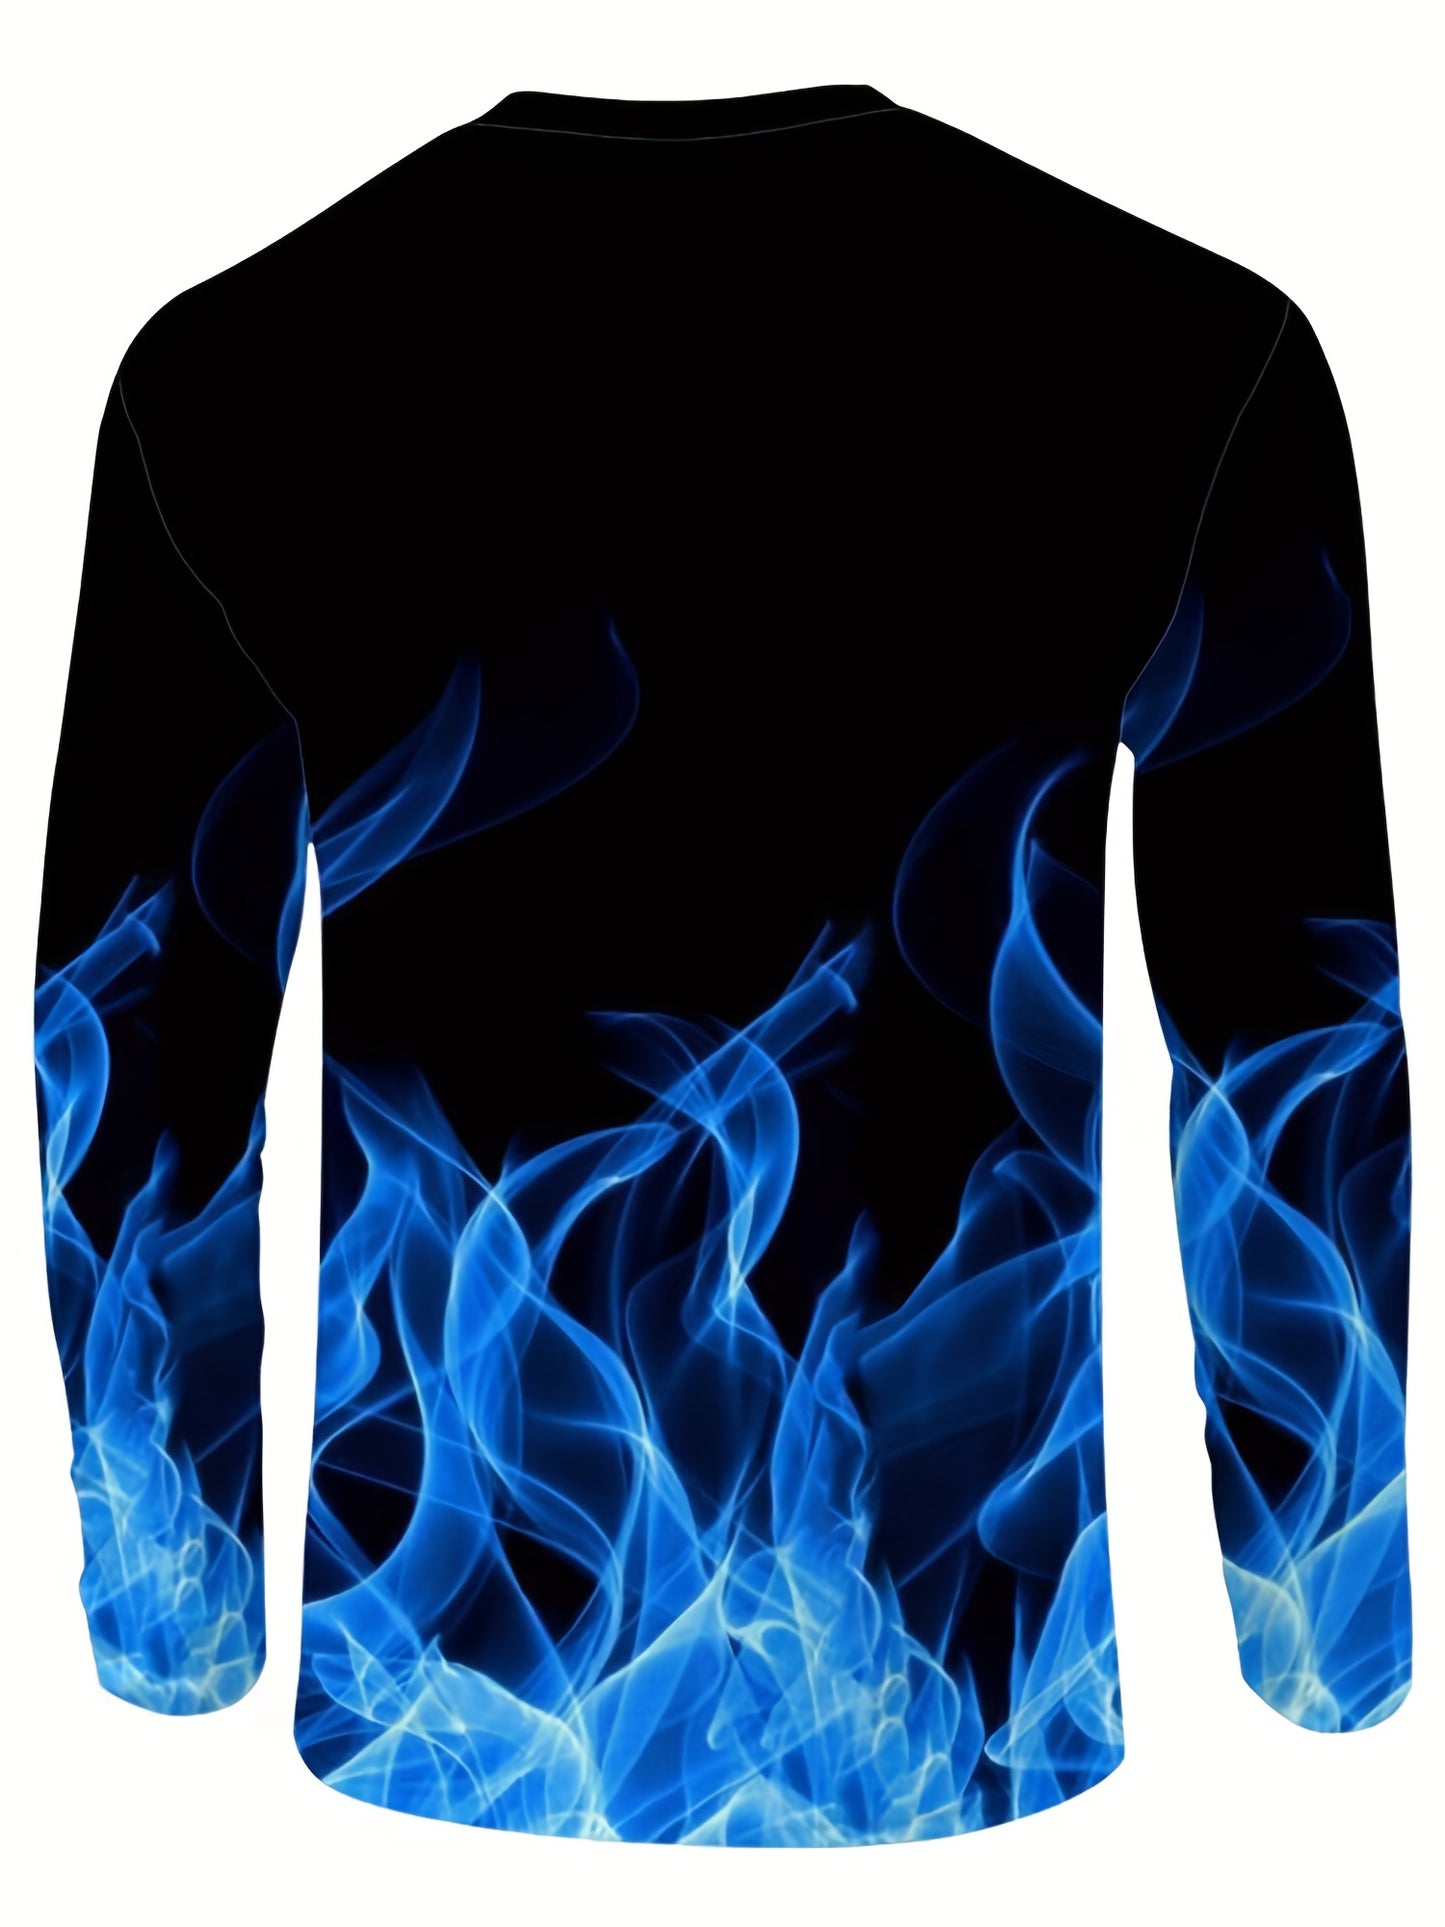 3D Digital Flame Print Men's Fashion Long Sleeve Crew Neck T-shirt, Men's Casual Tee For Spring Fall